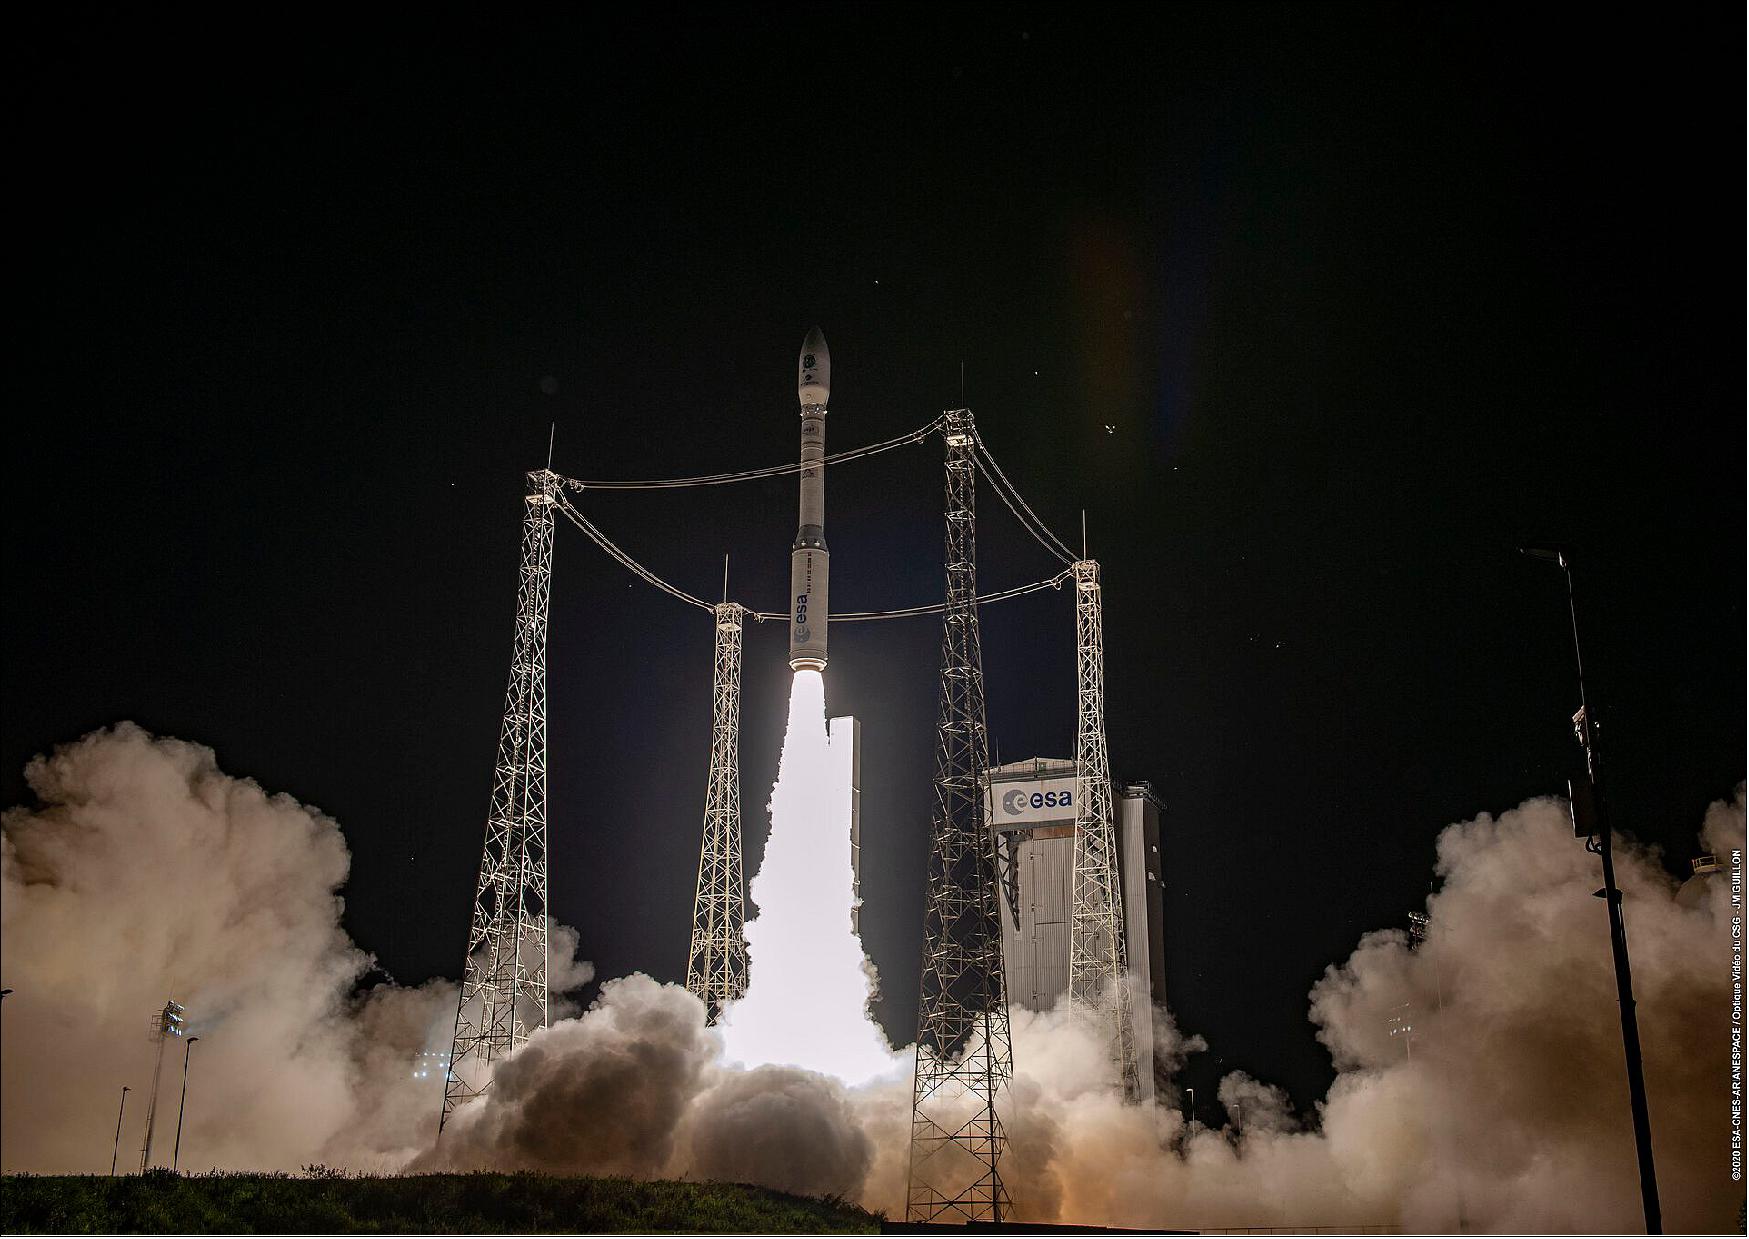 Figure 12: On 3 September (1:51 UTC) 2020, Vega flight VV16 lifted off from Europe's Spaceport in French Guiana to progressively deliver 53 light satellites into Sun-synchronous orbits at 515 km and 530 km altitude on a mission lasting 124 minutes (image credit: ESA/CNES/Arianespace/Optique Vidéo du CSG - JM Guillon)